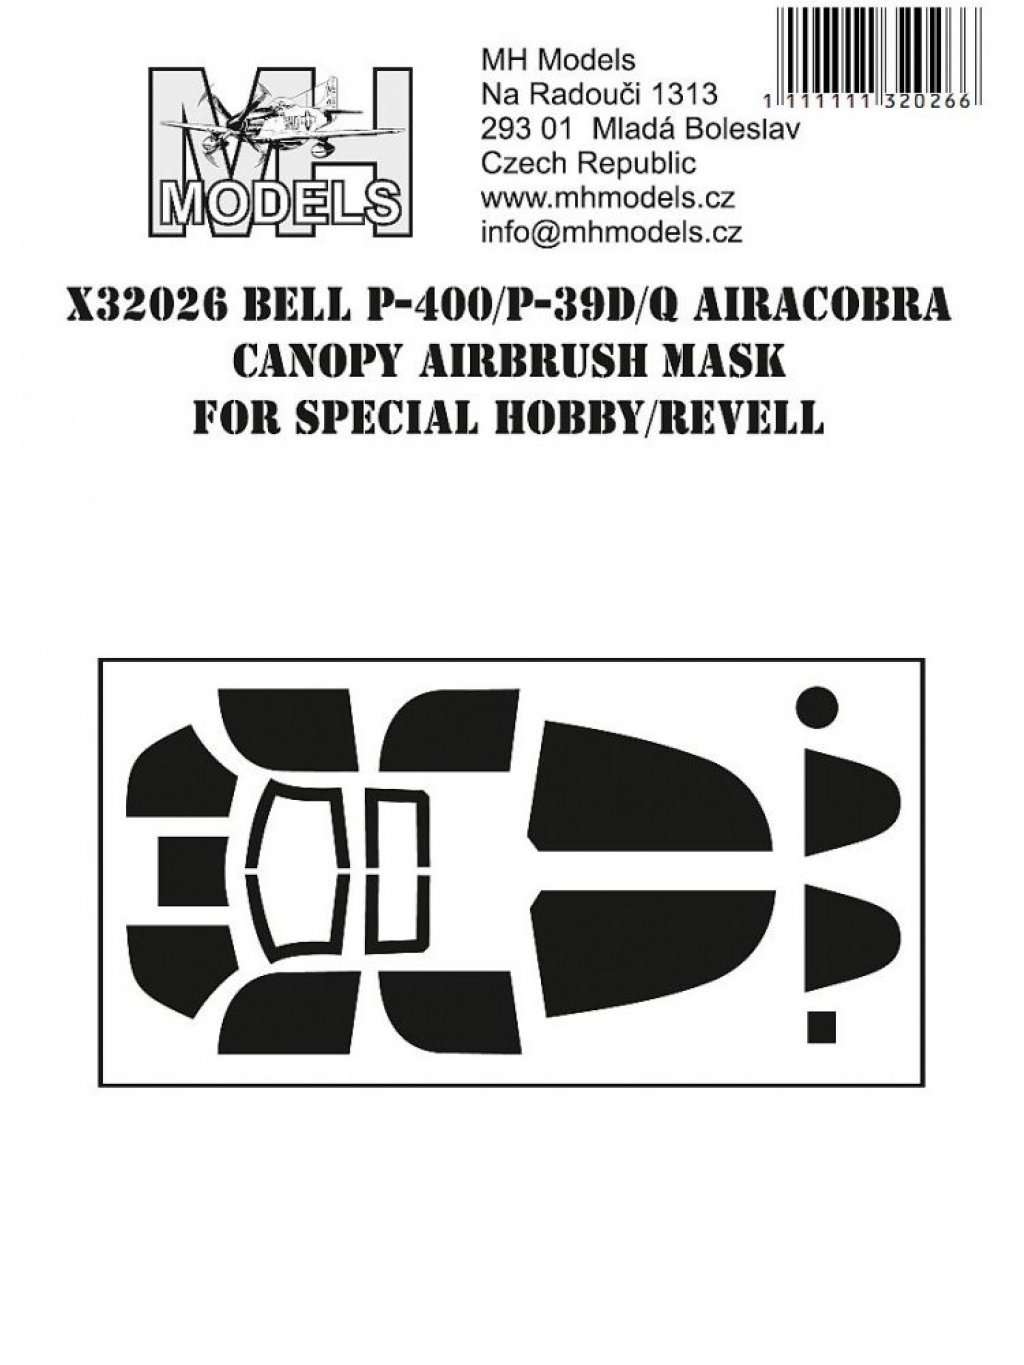 Bell P-400/P-39D/Q Airacobra canopy airbrush mask for Special Hobby